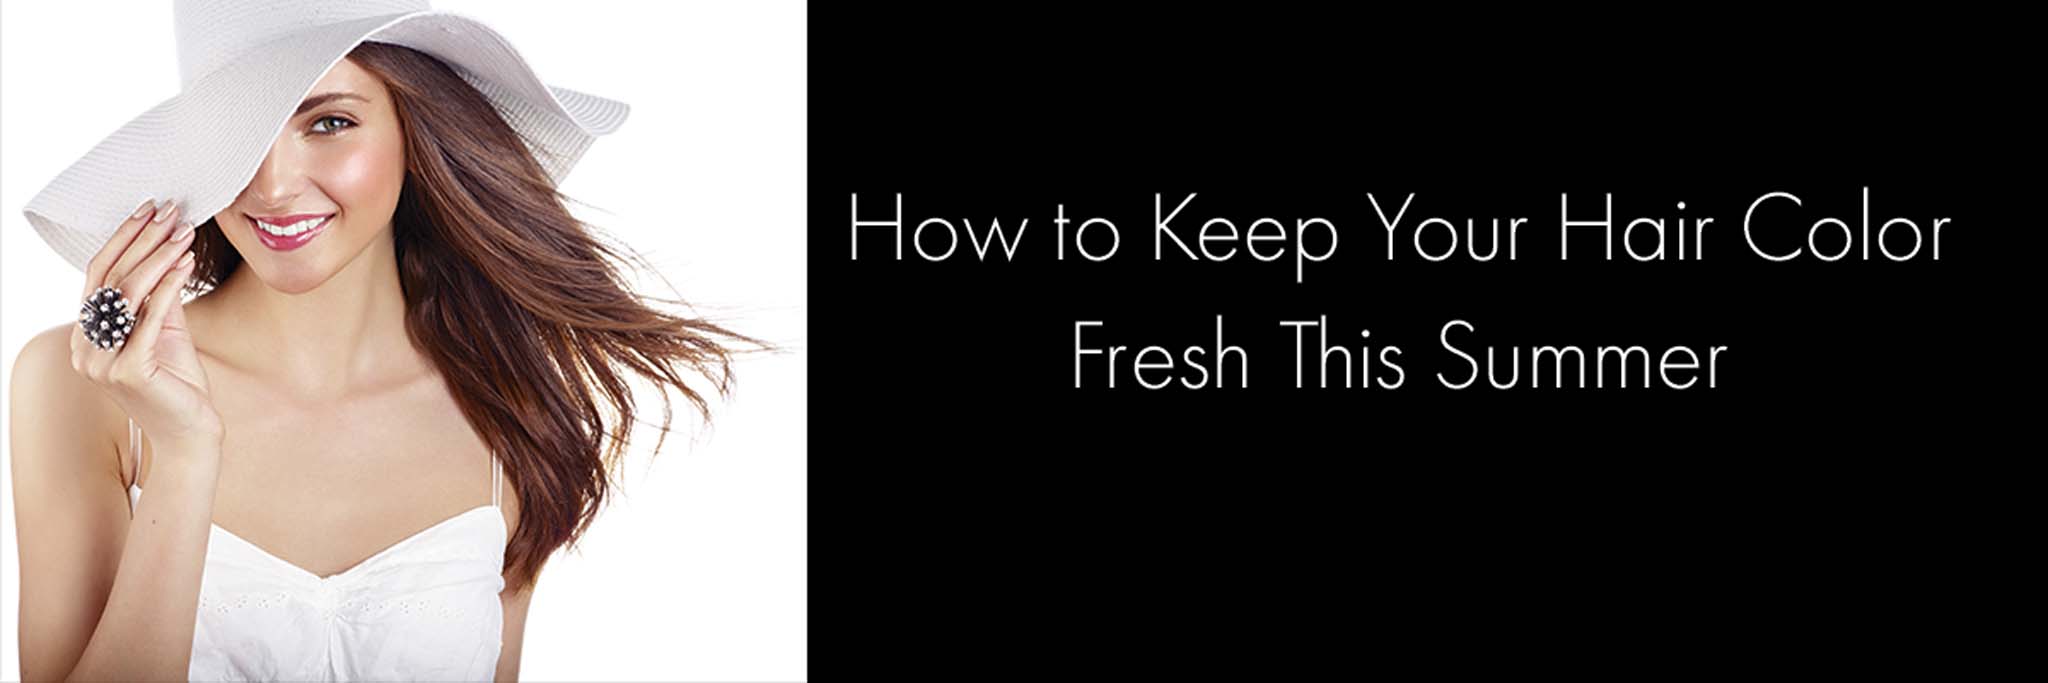 How to Keep Your Hair Color Fresh This Summer